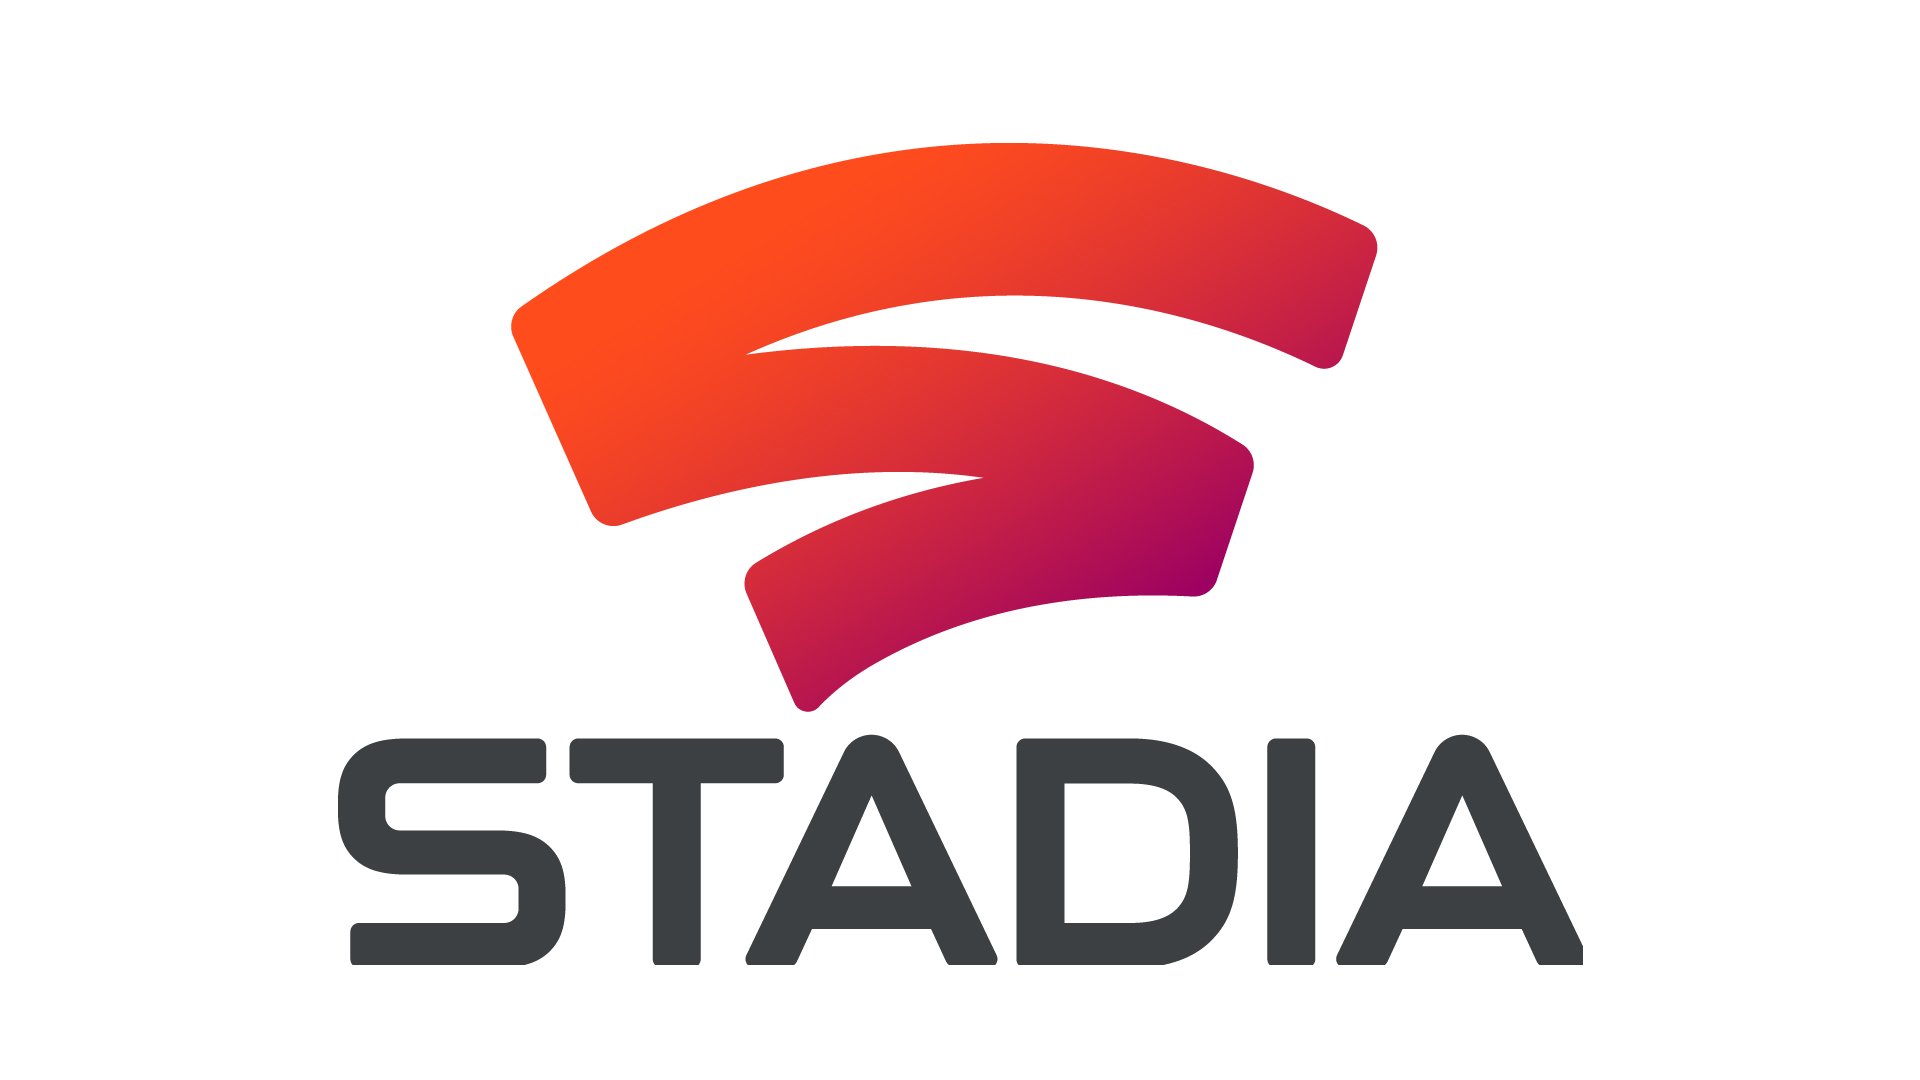 How to get Google Stadia on your iPhone or iPad